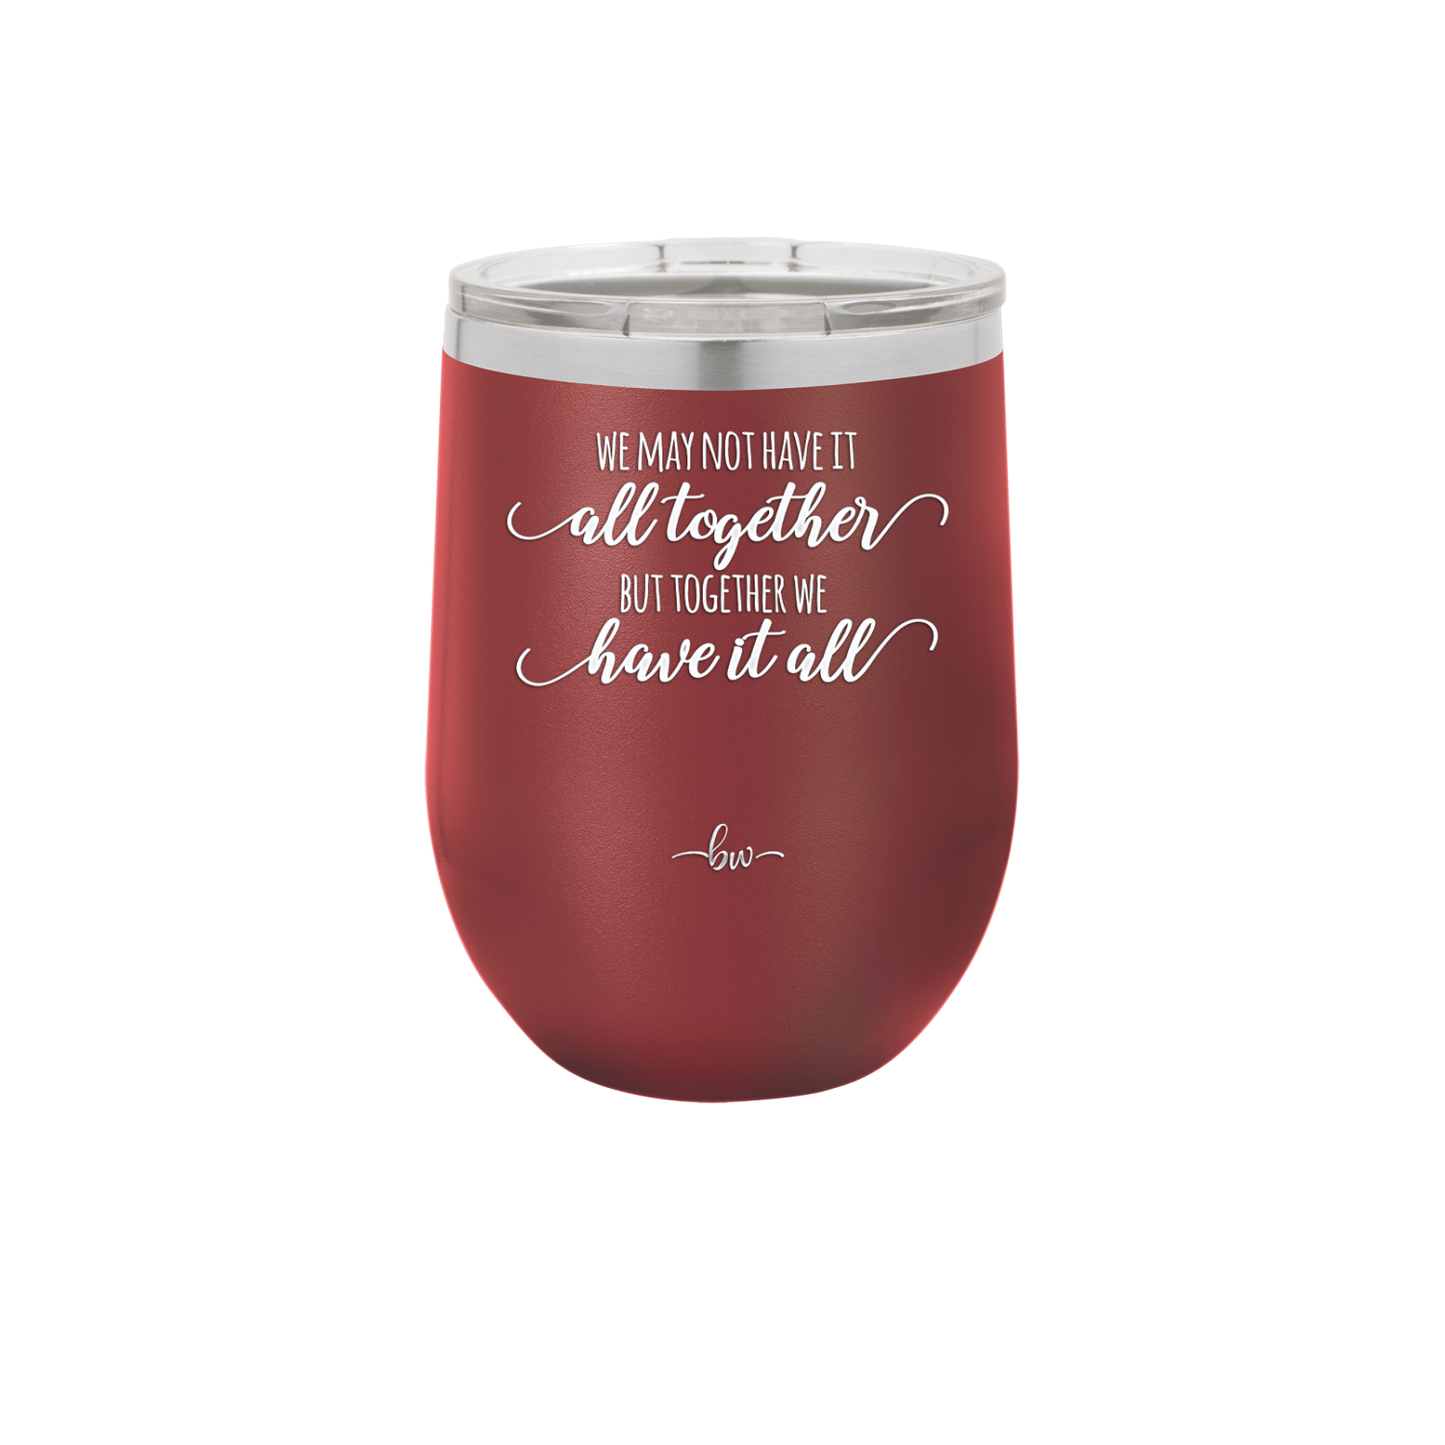 We May Not Have it All Together But Together We Have it All - Laser Engraved Stainless Steel Drinkware - 2014 -